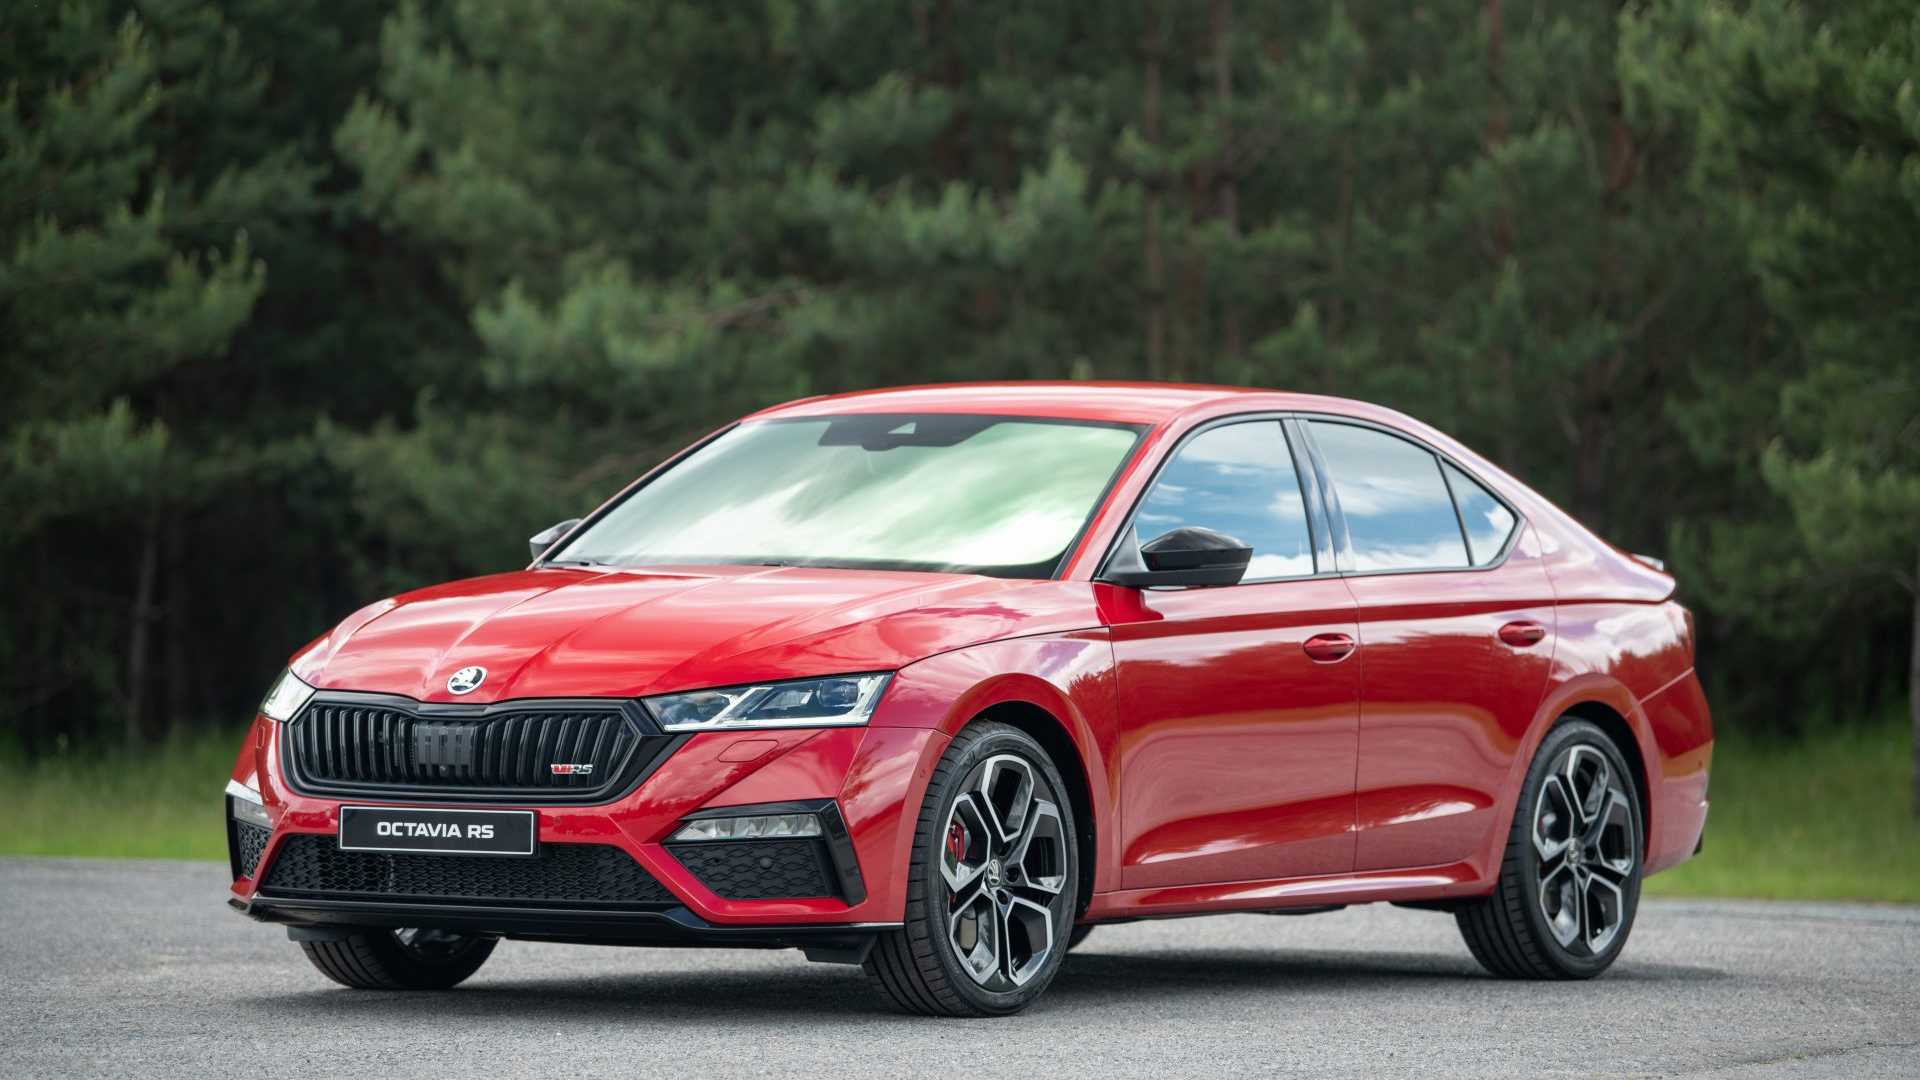 2021 Skoda Octavia RS Officially Revealed With More Power